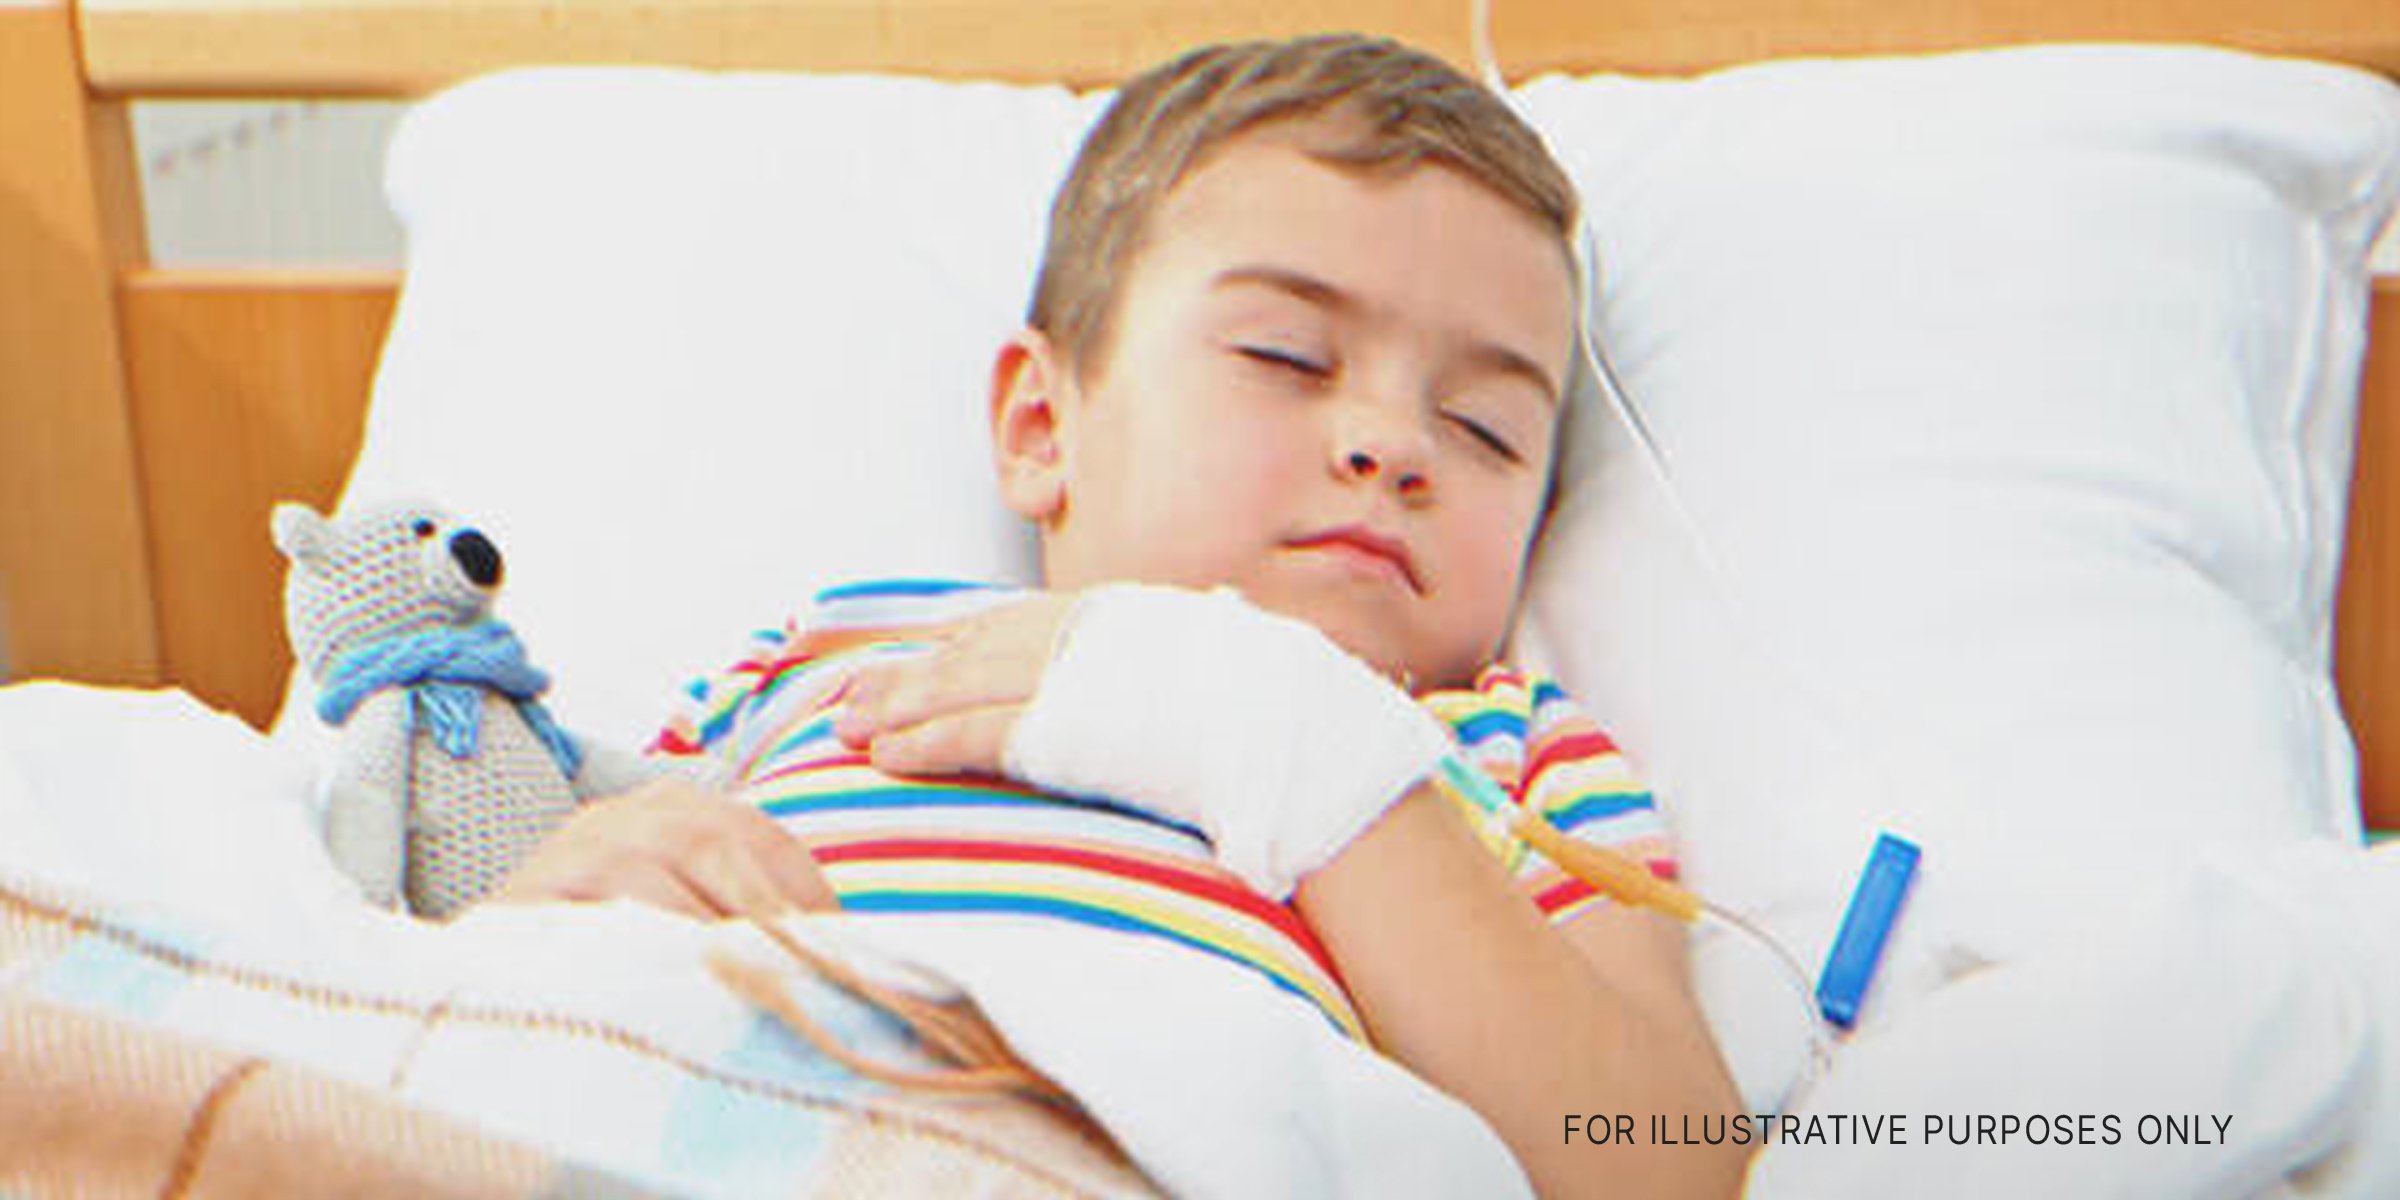 A young boy sleeps in a hospital bed | Source: Shutterstock